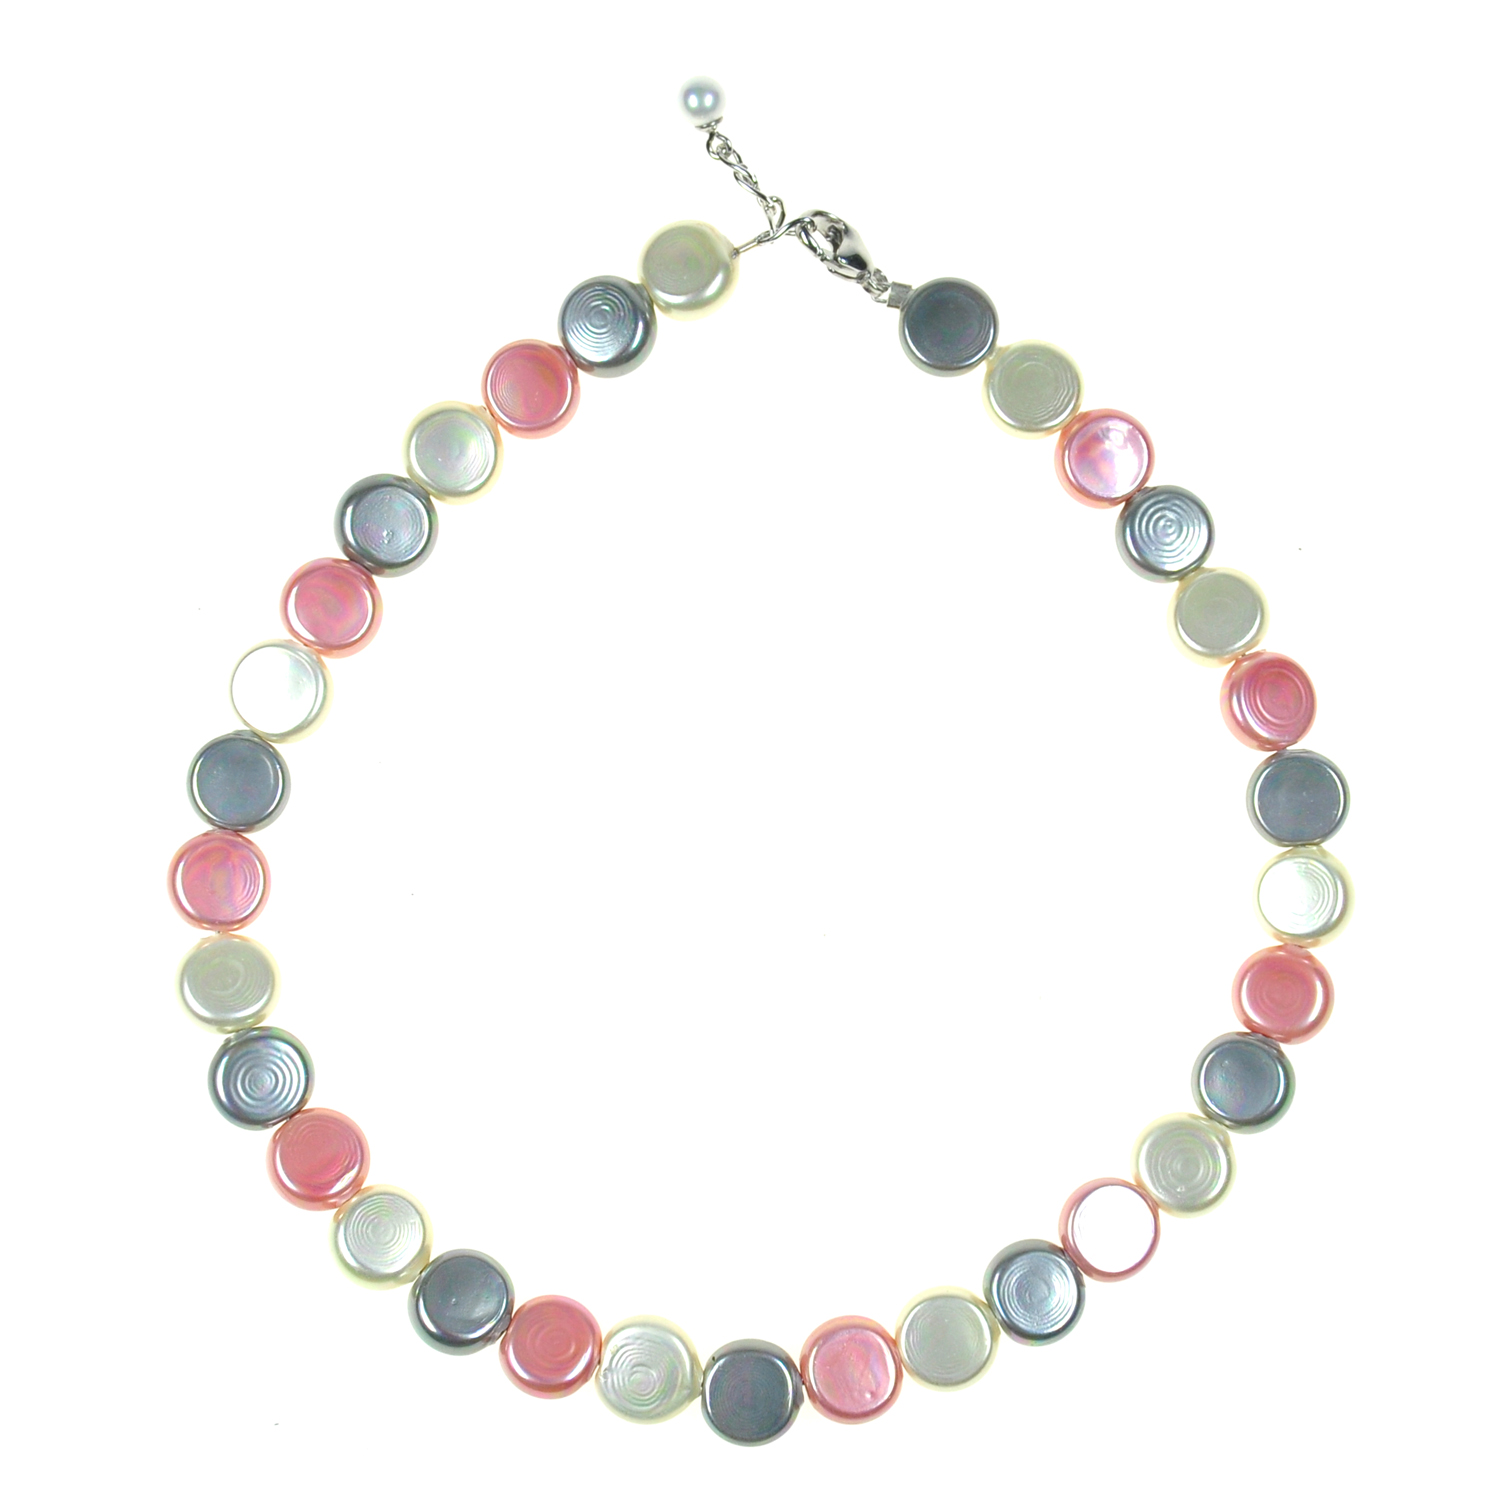 Rondelle pearl choker necklace